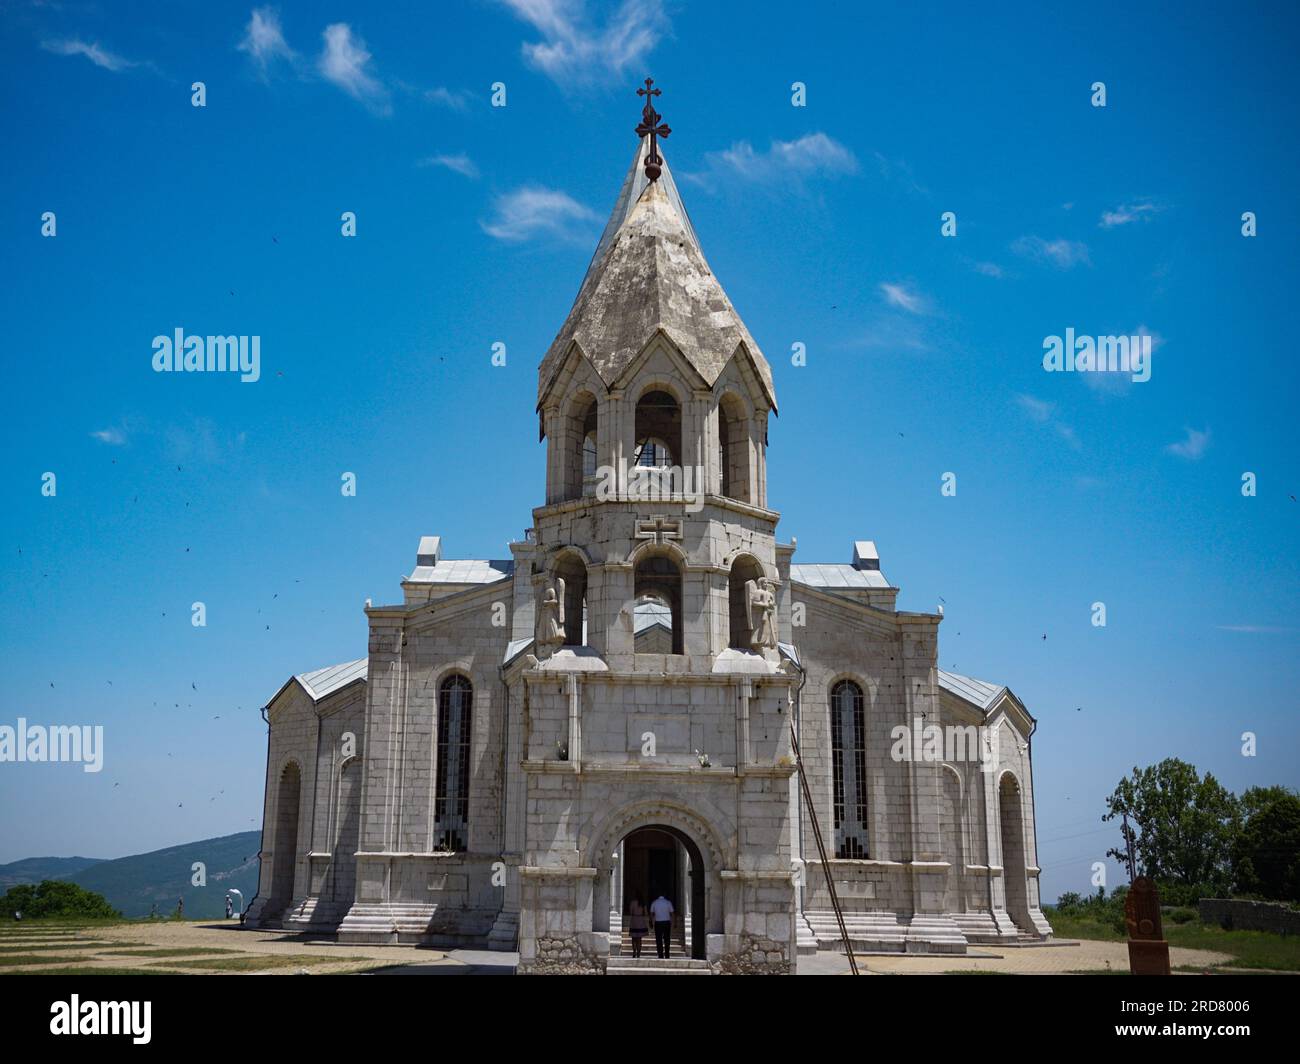 The exterior of the Ghazanchetsots Cathedral in Shusha, Nagorno-Karabakh. The unrecognised yet de facto independent country in South Caucasus, Nagorno-Karabakh (also known as Artsakh) has been in the longest-running territorial dispute between Azerbaijan and Armenia in post-Soviet Eurasia since the collapse of Soviet Union. It is mainly populated by ethnic Armenians. Stock Photo